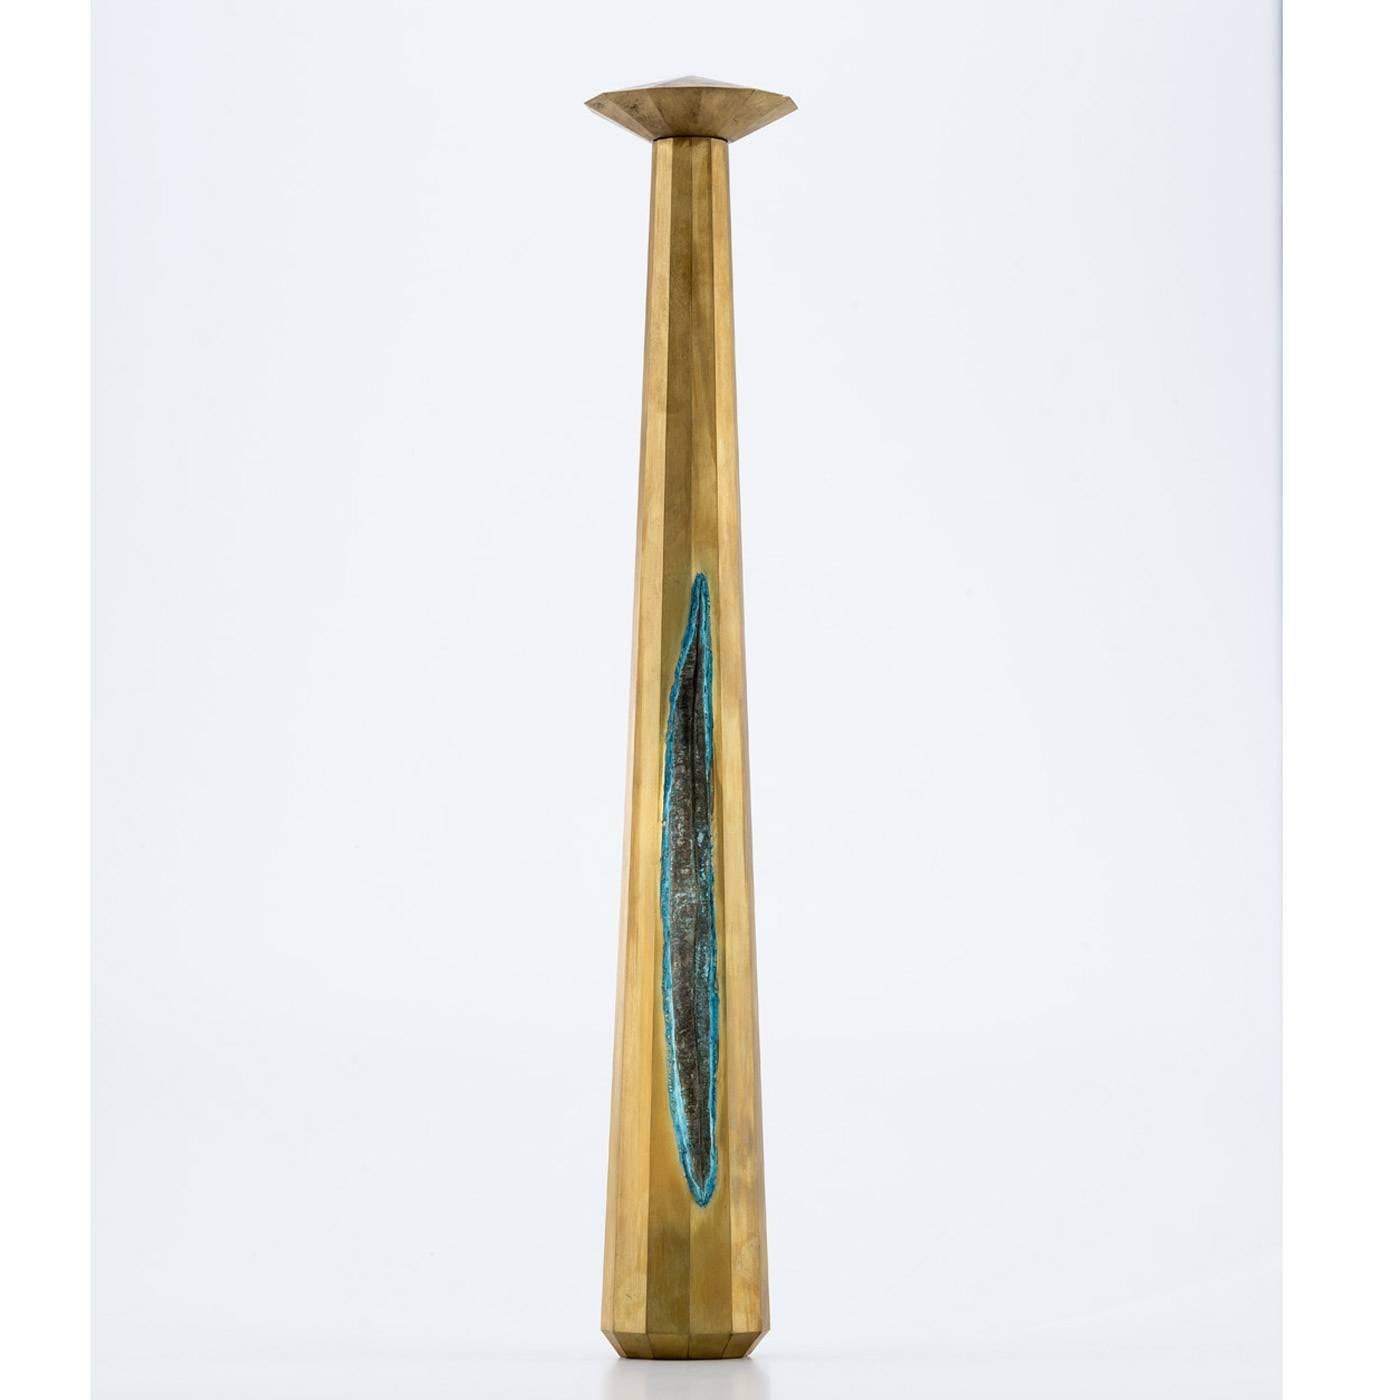 This elegant tall vase has a slender shape, tapering at the top, where another brass component with a circular shape sits. The brass plates used in the making of this piece have been oxidized by hand and shaped using a special technique involving a